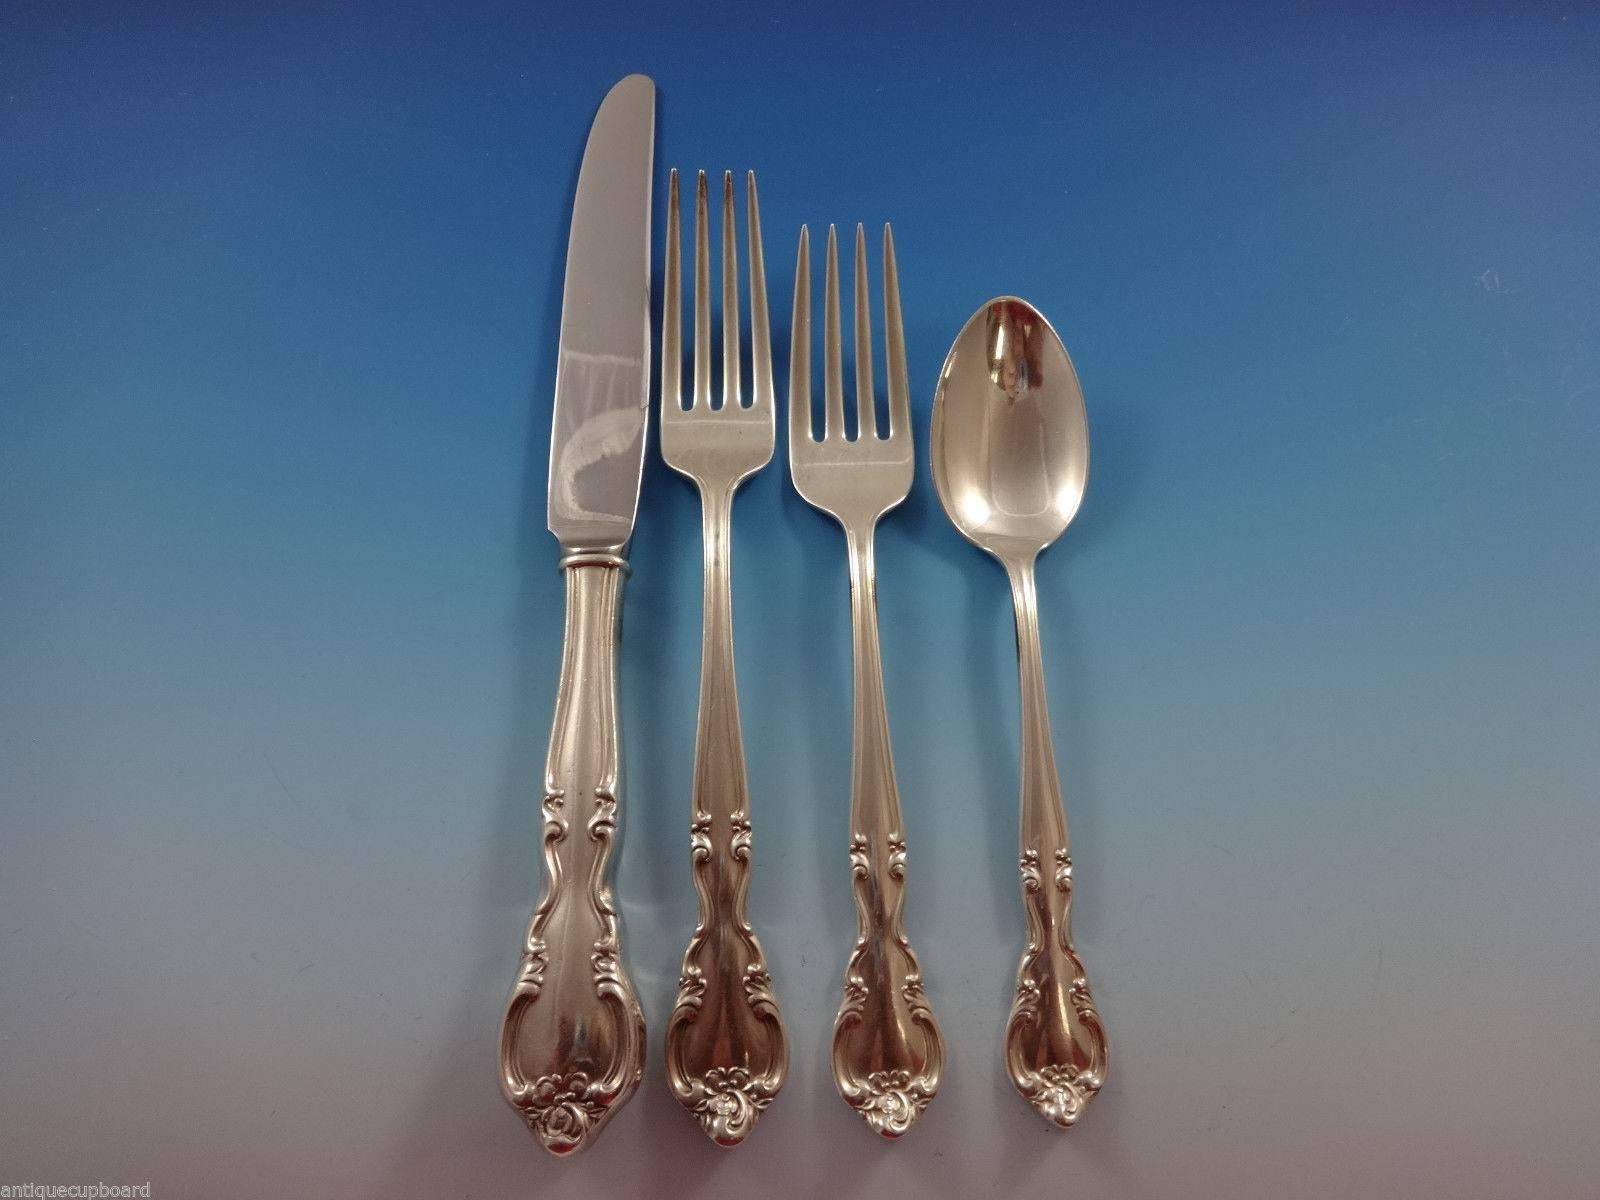 Beautiful American Classic by Easterling sterling silver flatware set - 53 pieces. This set includes: 12 knives, 8 7/8